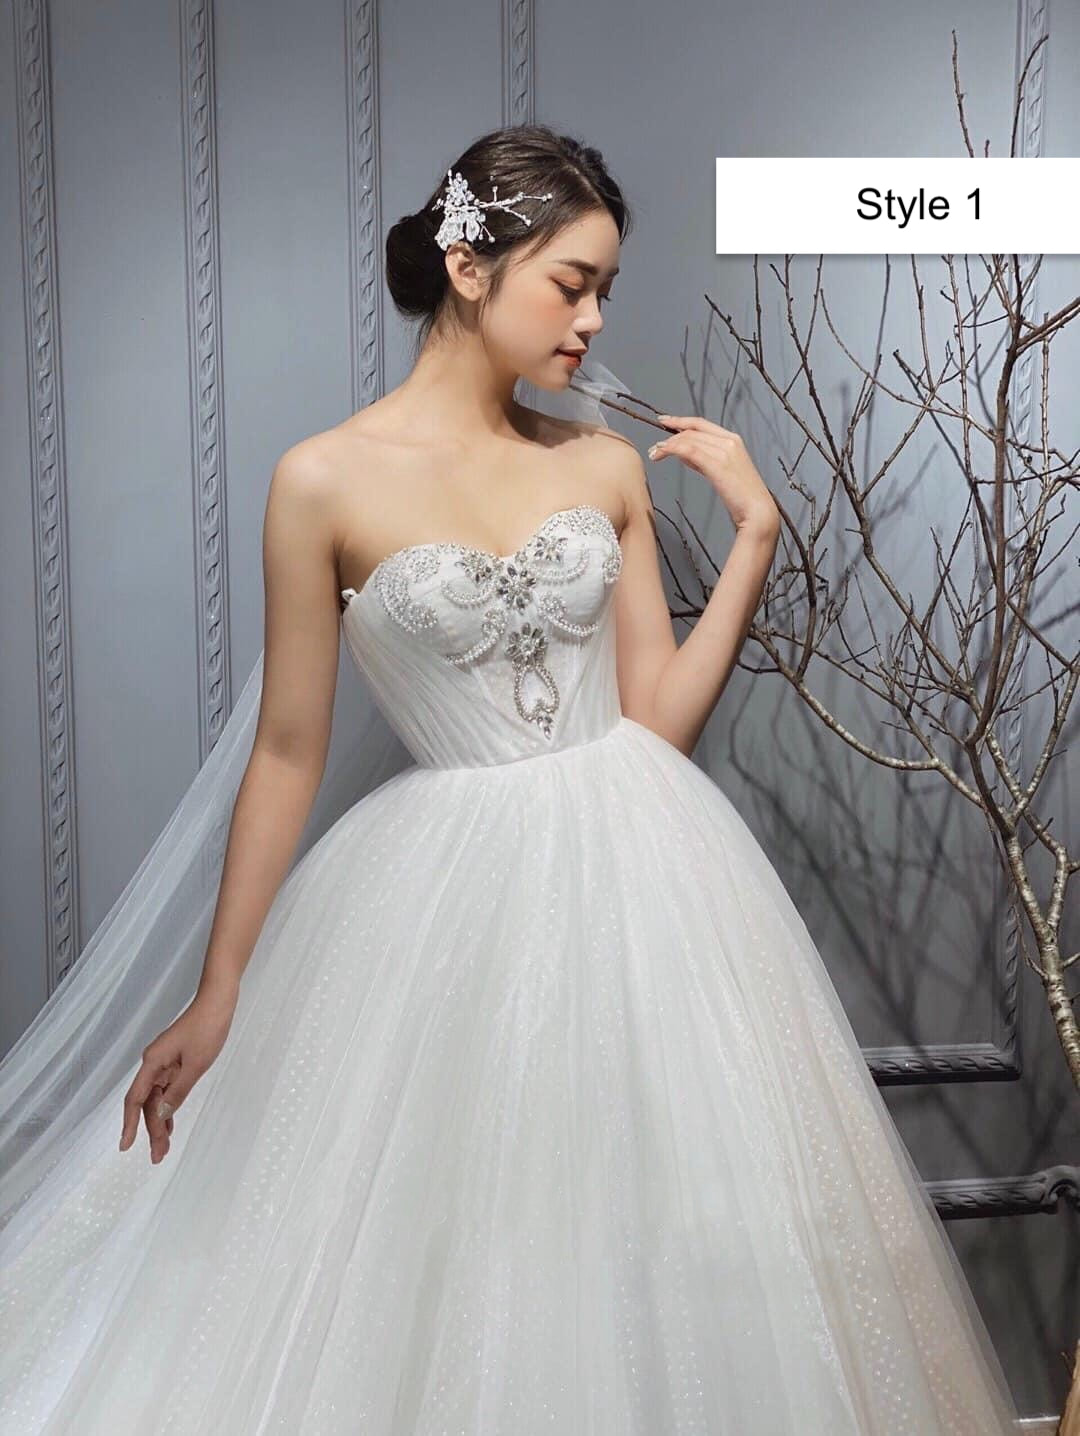 Off the shoulder bandeau or corset top white sparkle ballgown wedding dress  with glitter tulle - various styles